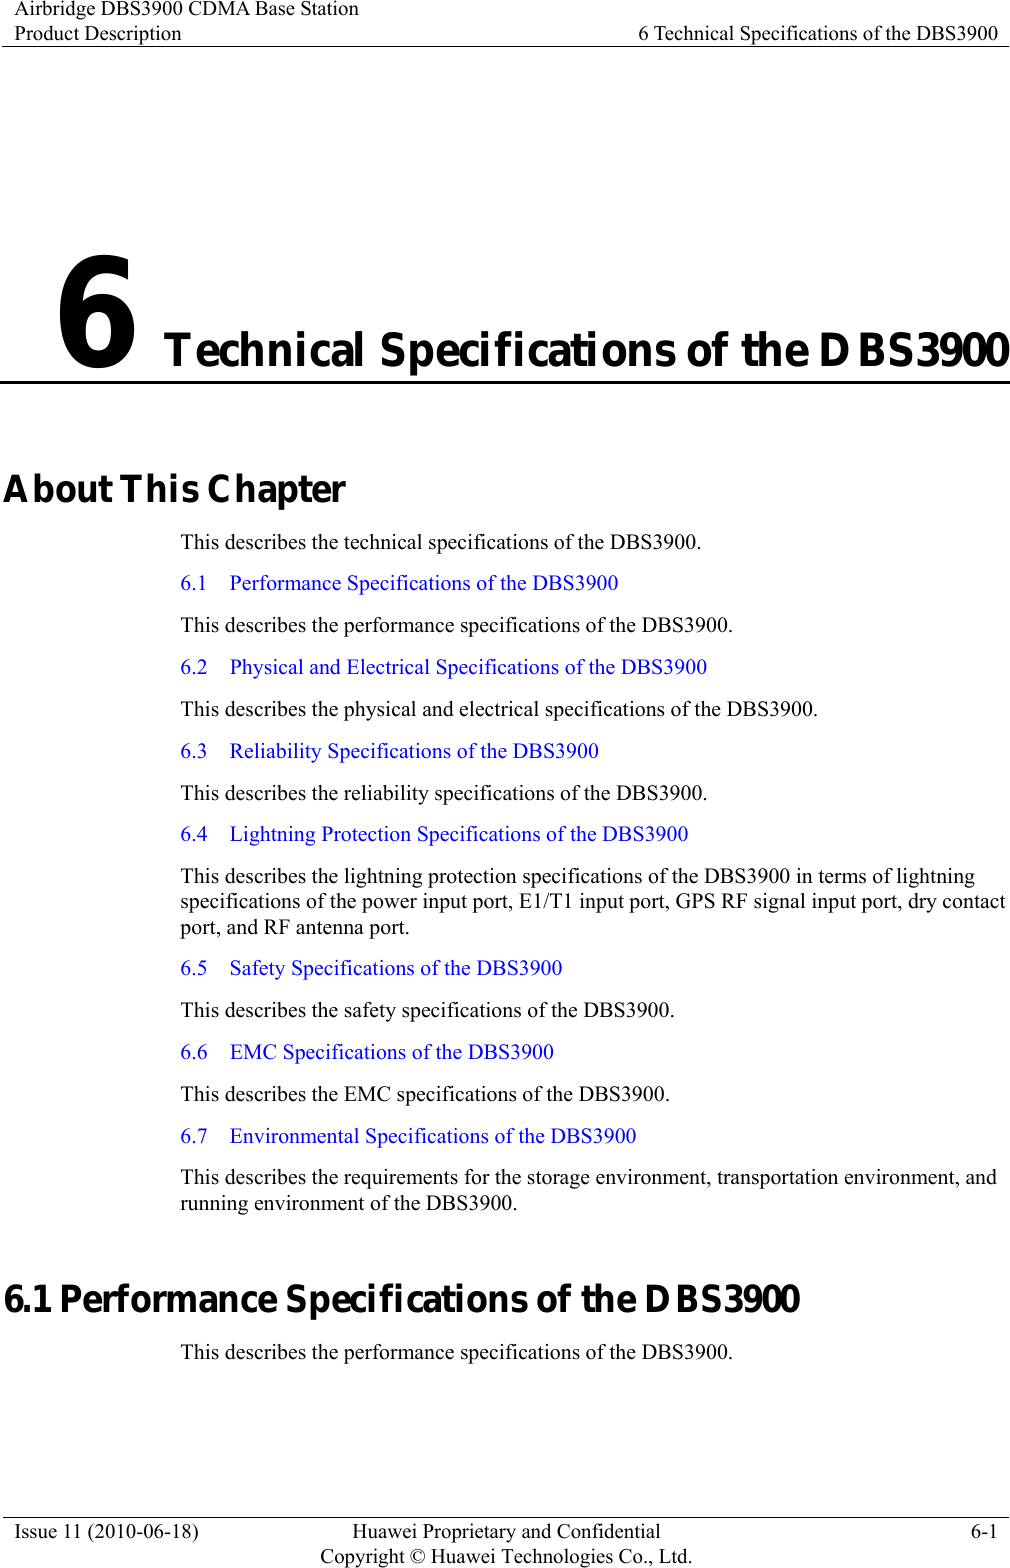 Airbridge DBS3900 CDMA Base Station Product Description  6 Technical Specifications of the DBS3900 Issue 11 (2010-06-18)  Huawei Proprietary and Confidential         Copyright © Huawei Technologies Co., Ltd.6-1 6 Technical Specifications of the DBS3900 About This Chapter This describes the technical specifications of the DBS3900. 6.1    Performance Specifications of the DBS3900 This describes the performance specifications of the DBS3900.   6.2    Physical and Electrical Specifications of the DBS3900 This describes the physical and electrical specifications of the DBS3900. 6.3    Reliability Specifications of the DBS3900 This describes the reliability specifications of the DBS3900. 6.4    Lightning Protection Specifications of the DBS3900 This describes the lightning protection specifications of the DBS3900 in terms of lightning specifications of the power input port, E1/T1 input port, GPS RF signal input port, dry contact port, and RF antenna port. 6.5    Safety Specifications of the DBS3900 This describes the safety specifications of the DBS3900. 6.6    EMC Specifications of the DBS3900 This describes the EMC specifications of the DBS3900. 6.7    Environmental Specifications of the DBS3900 This describes the requirements for the storage environment, transportation environment, and running environment of the DBS3900. 6.1 Performance Specifications of the DBS3900 This describes the performance specifications of the DBS3900.   